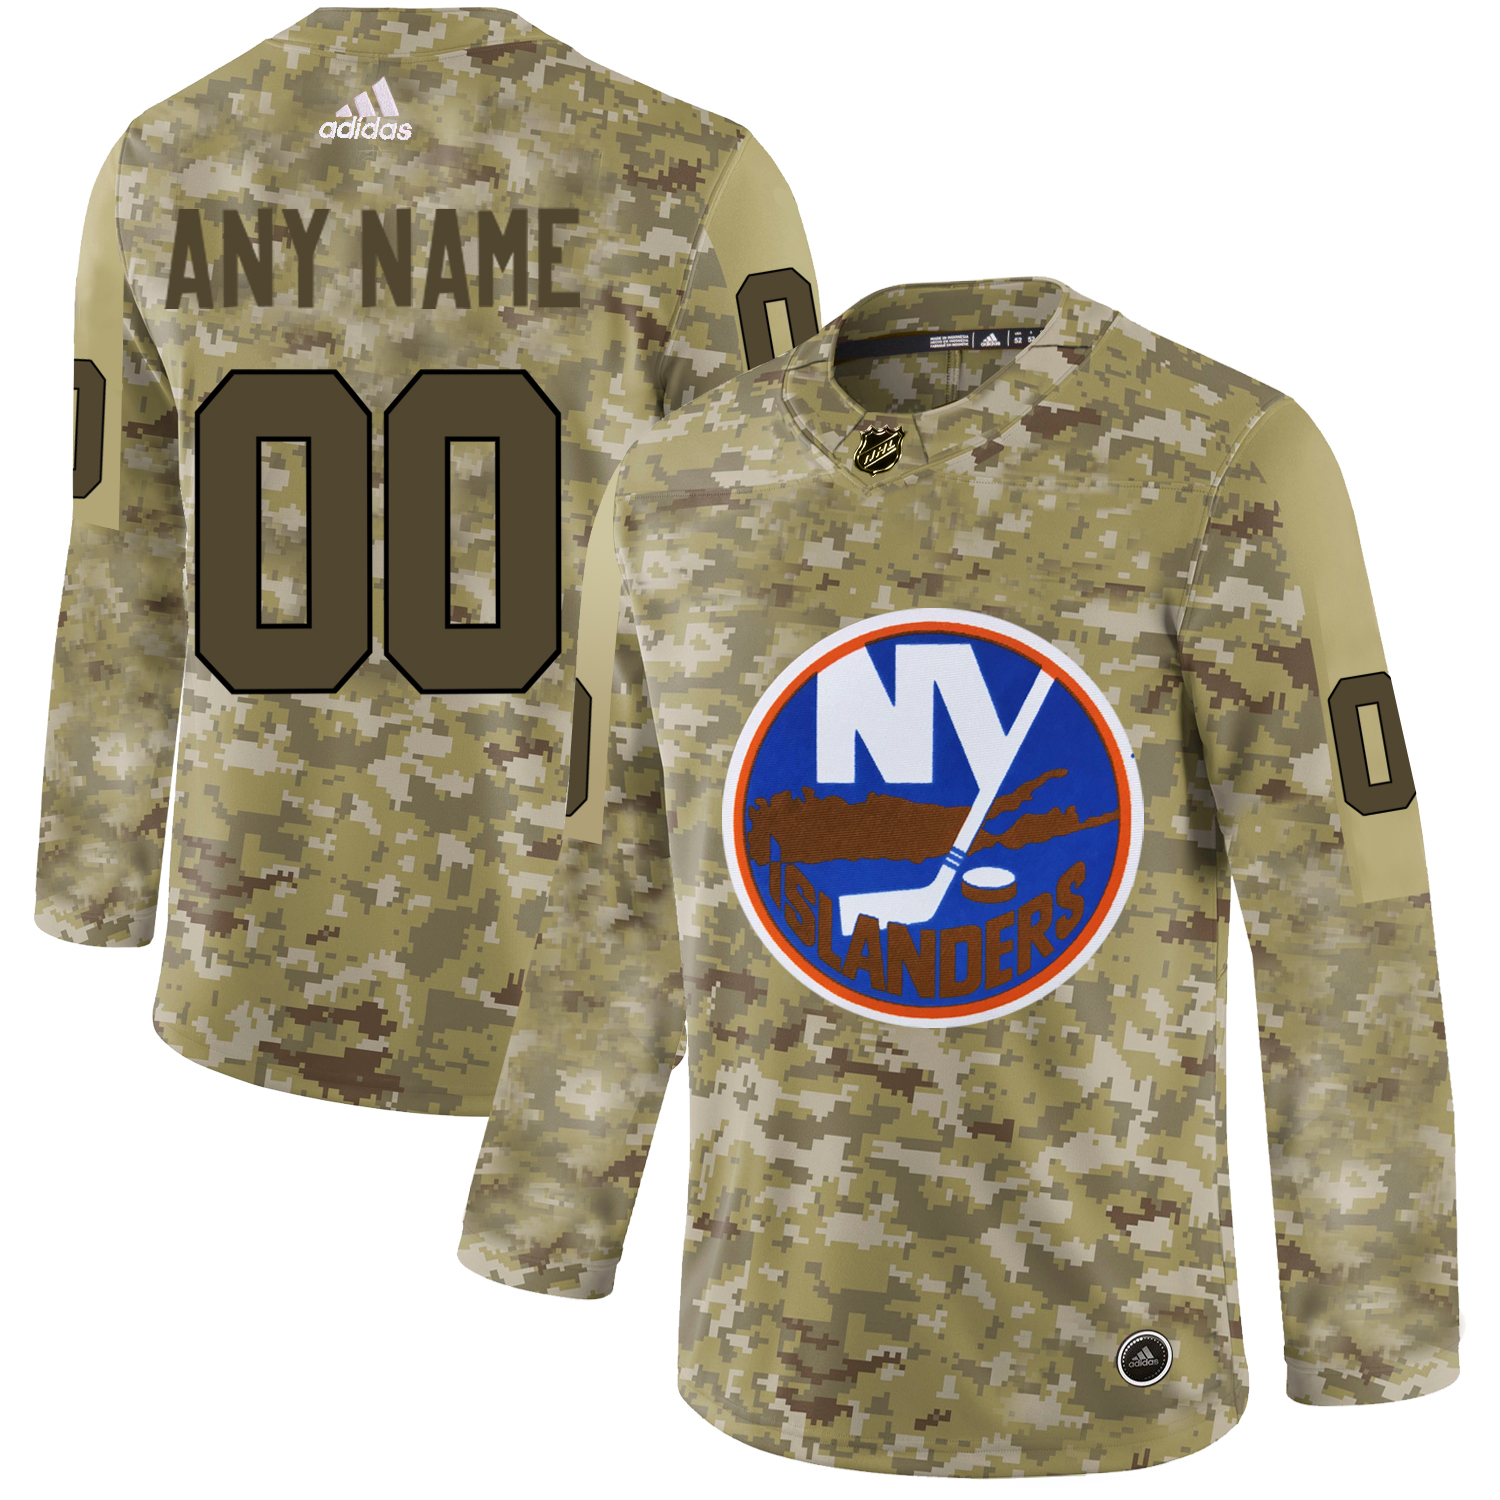 Men's Adidas Islanders Personalized Camo Authentic NHL Jersey